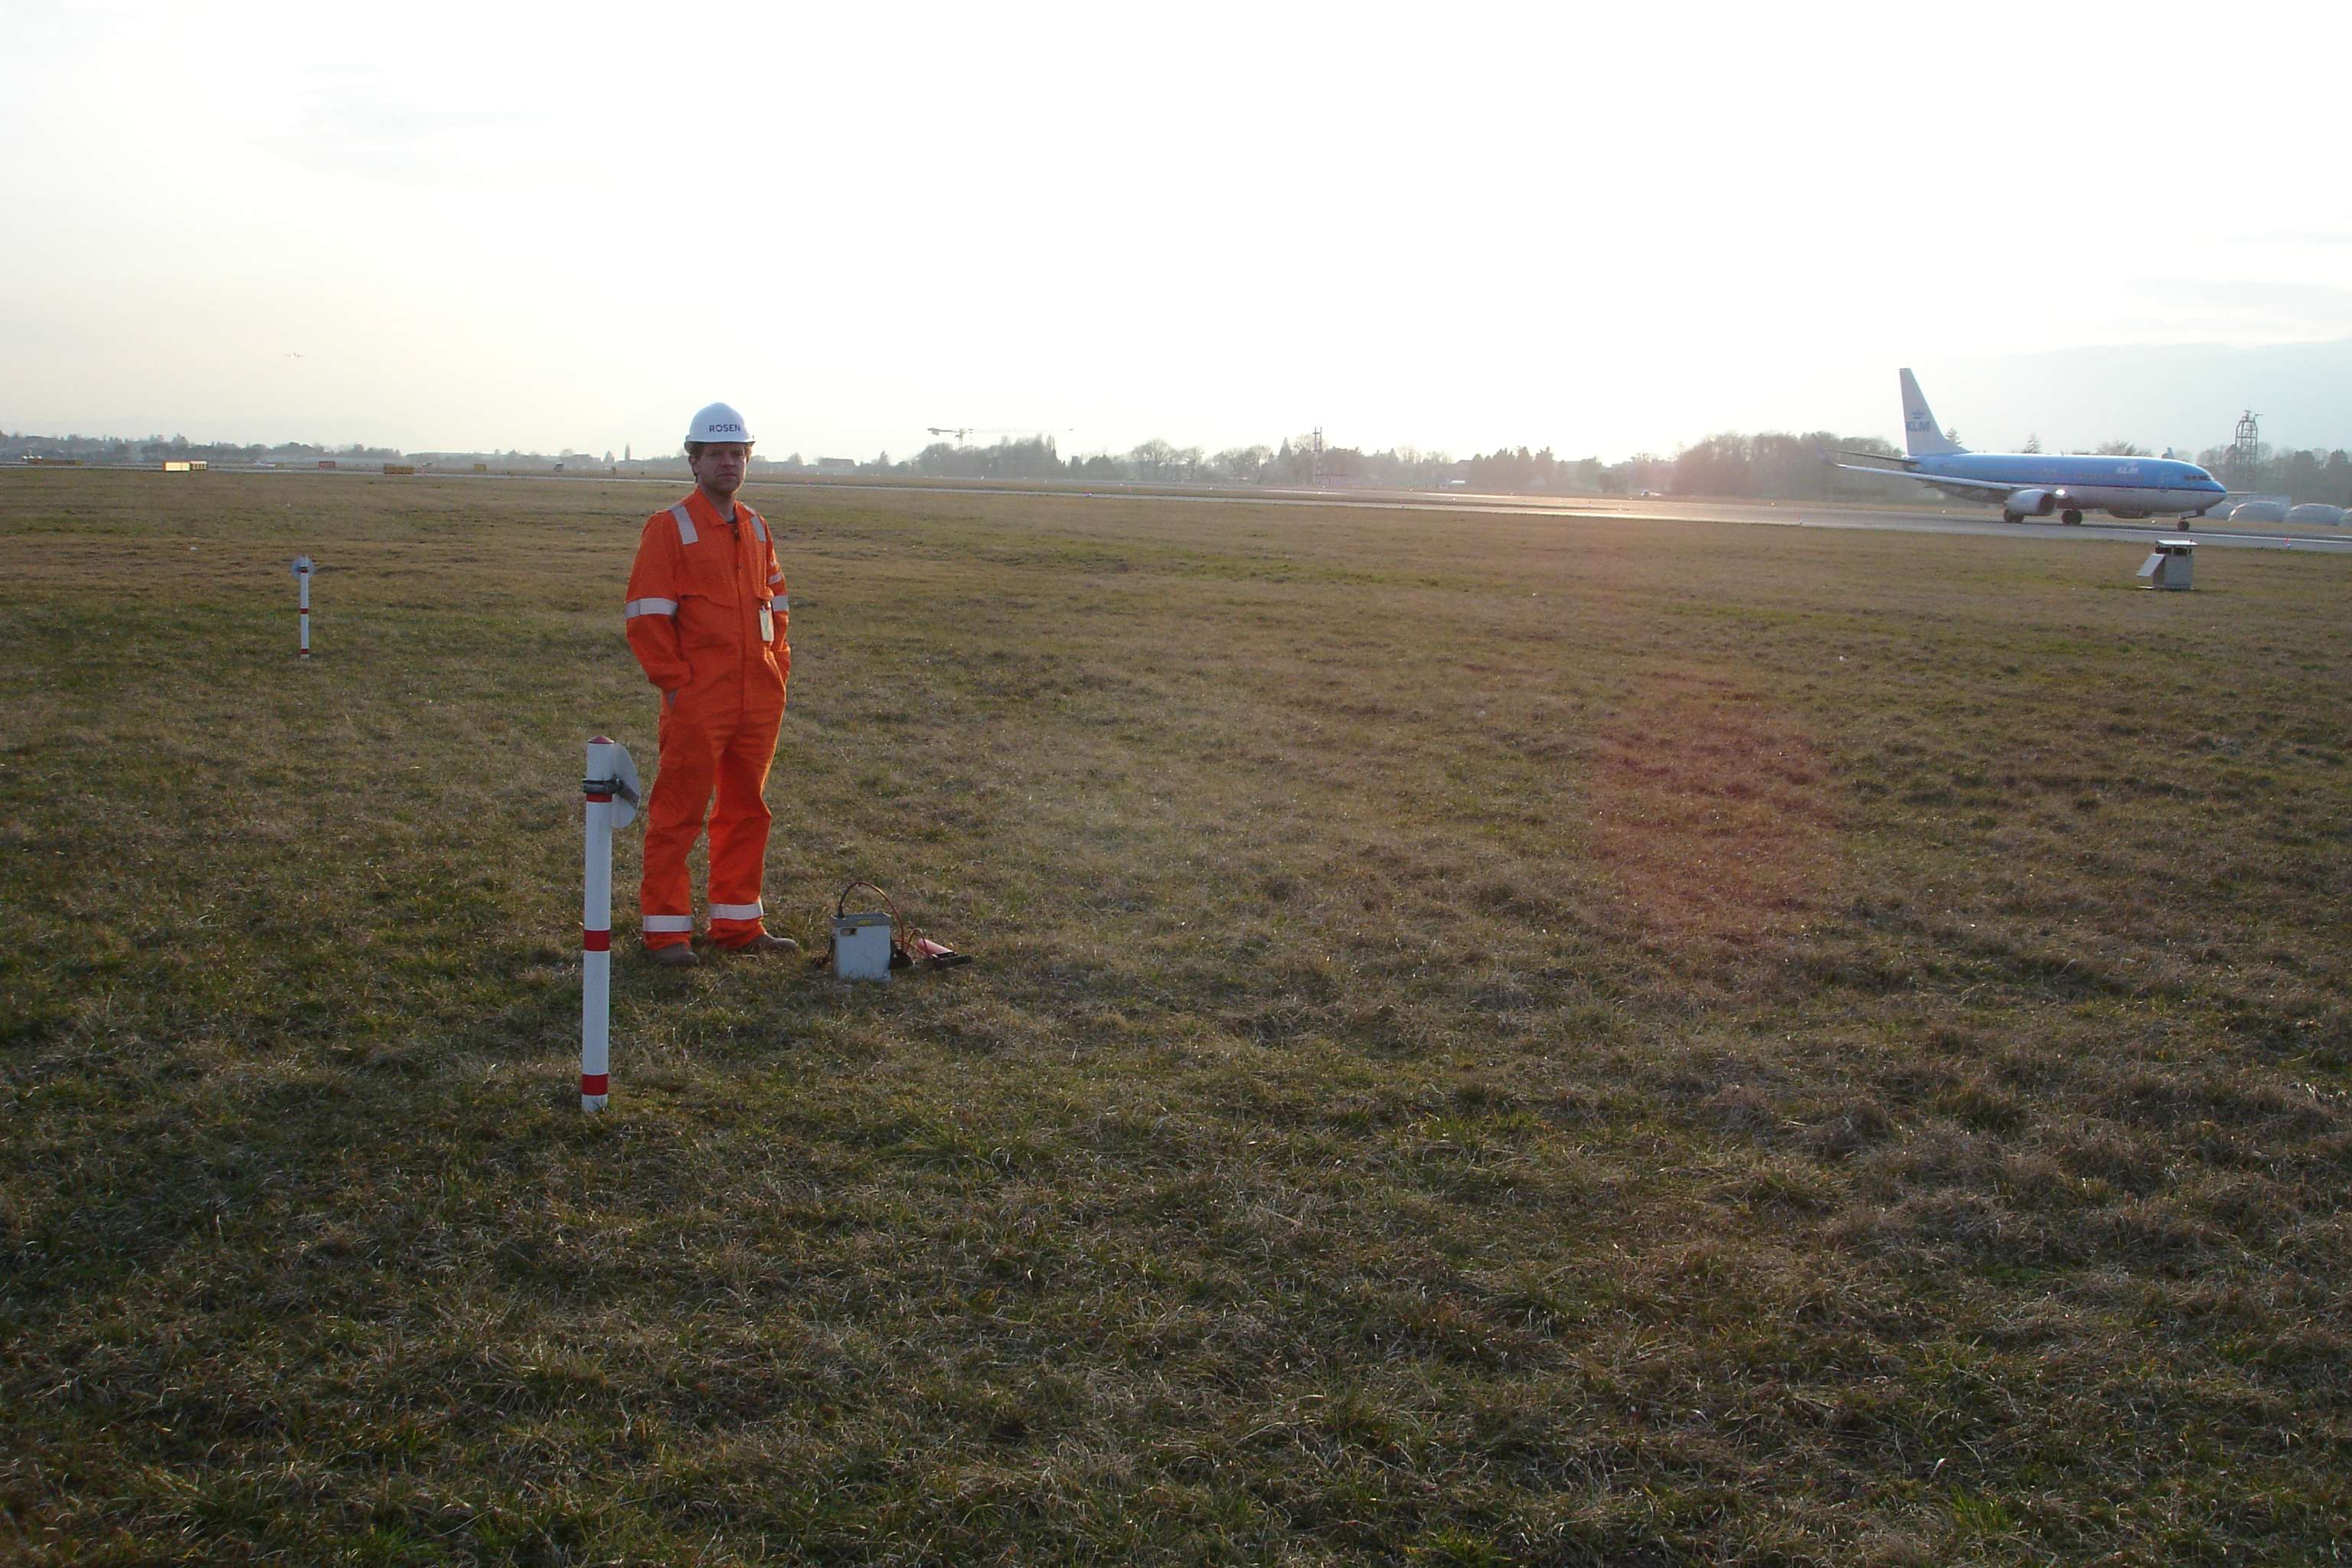 Worker with helmet on a grassy area next to a runway.